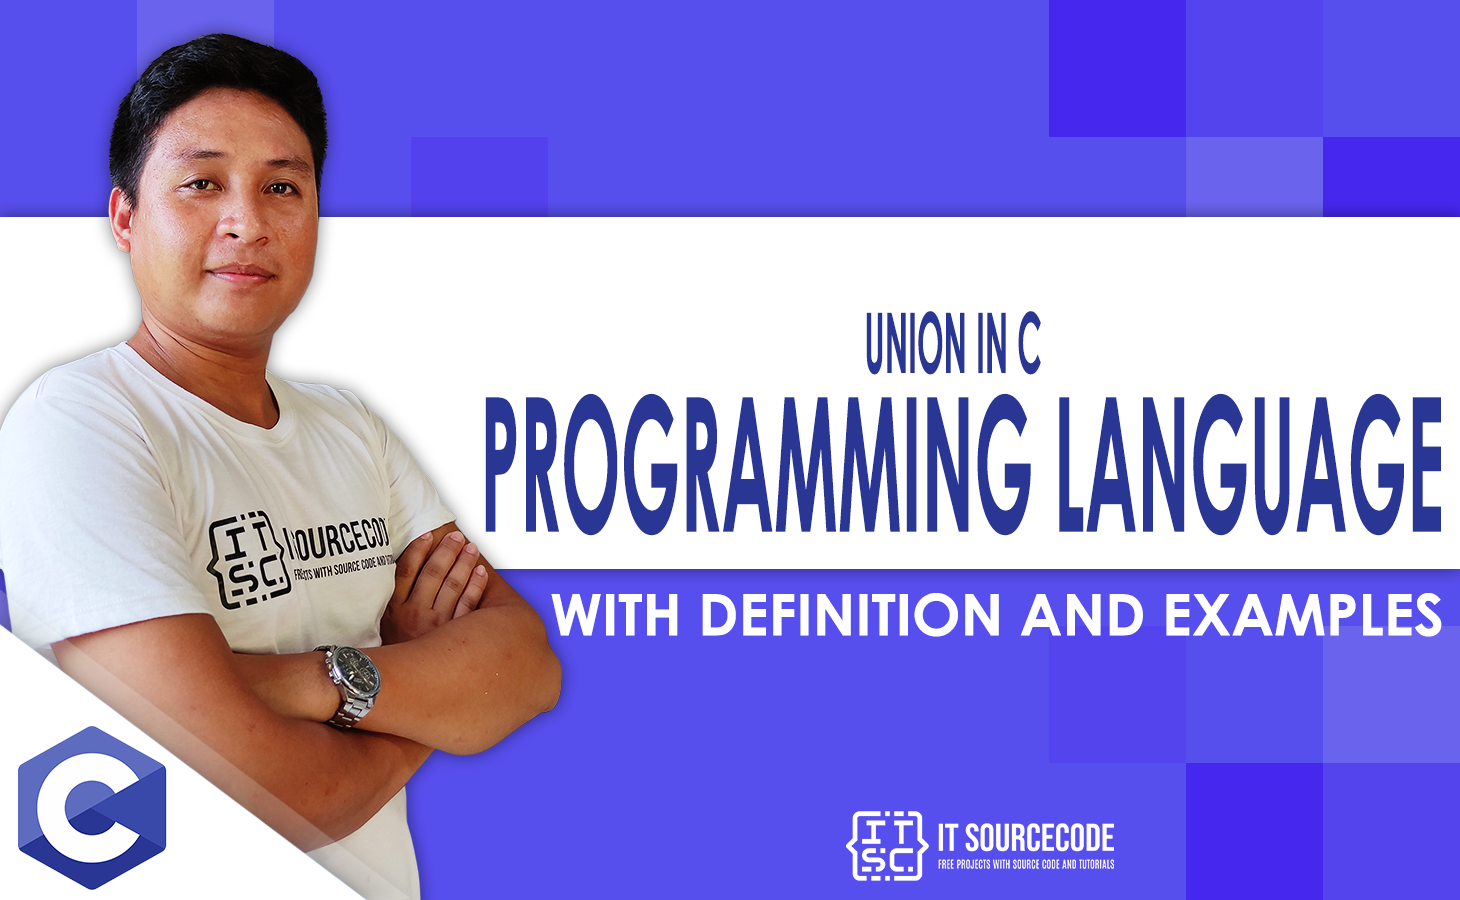 Union in C Programming Language with Definition and Examples